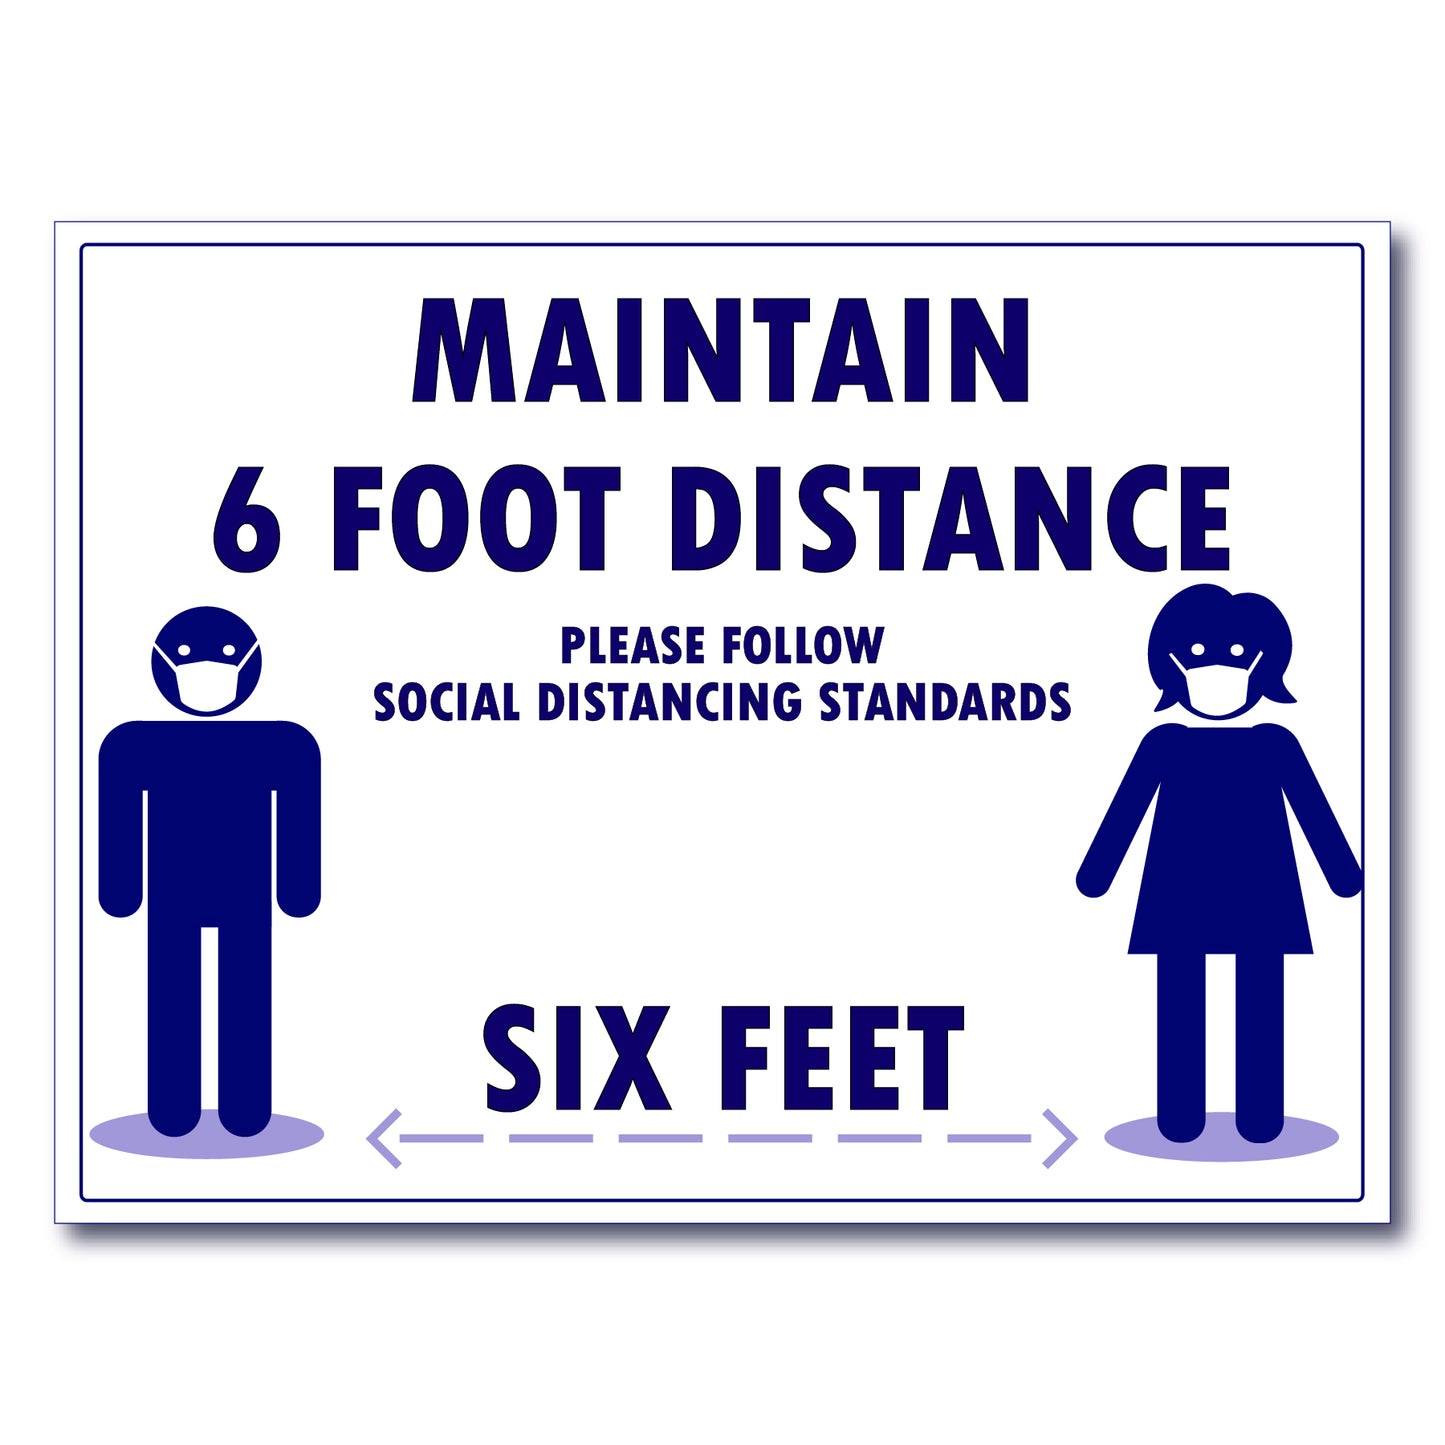 Covid-19 social distance sign